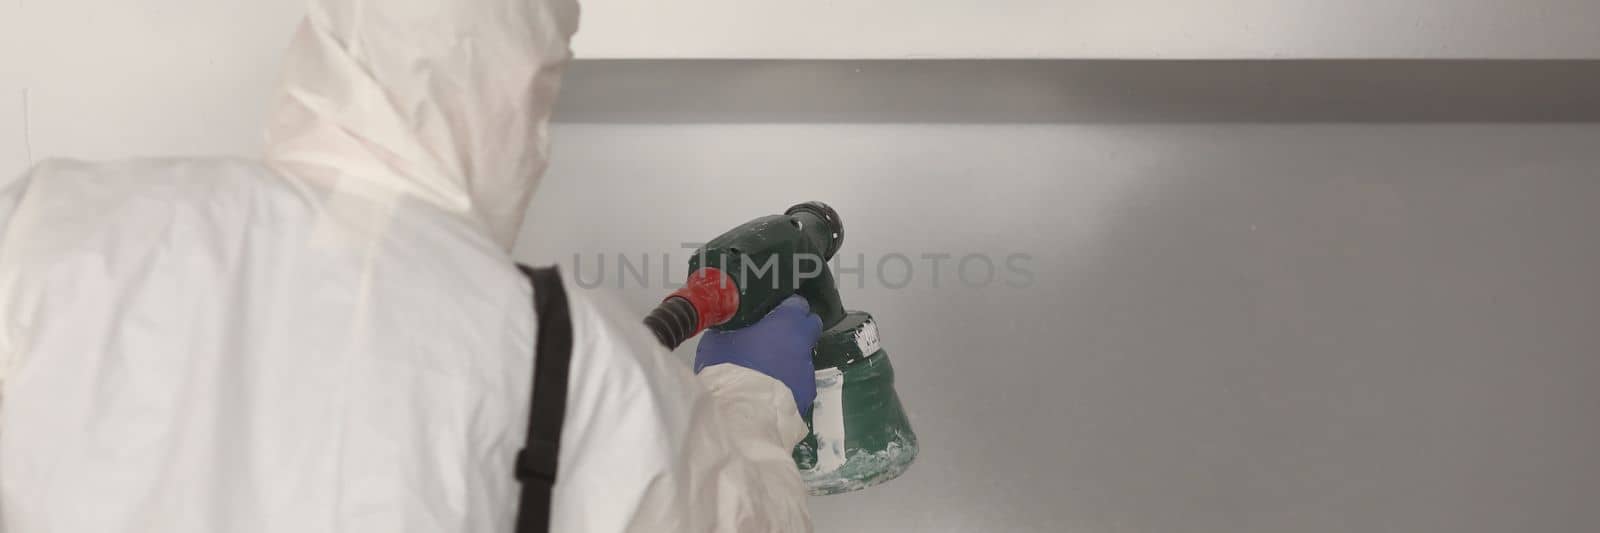 Worker paints wall white with spray gun by kuprevich